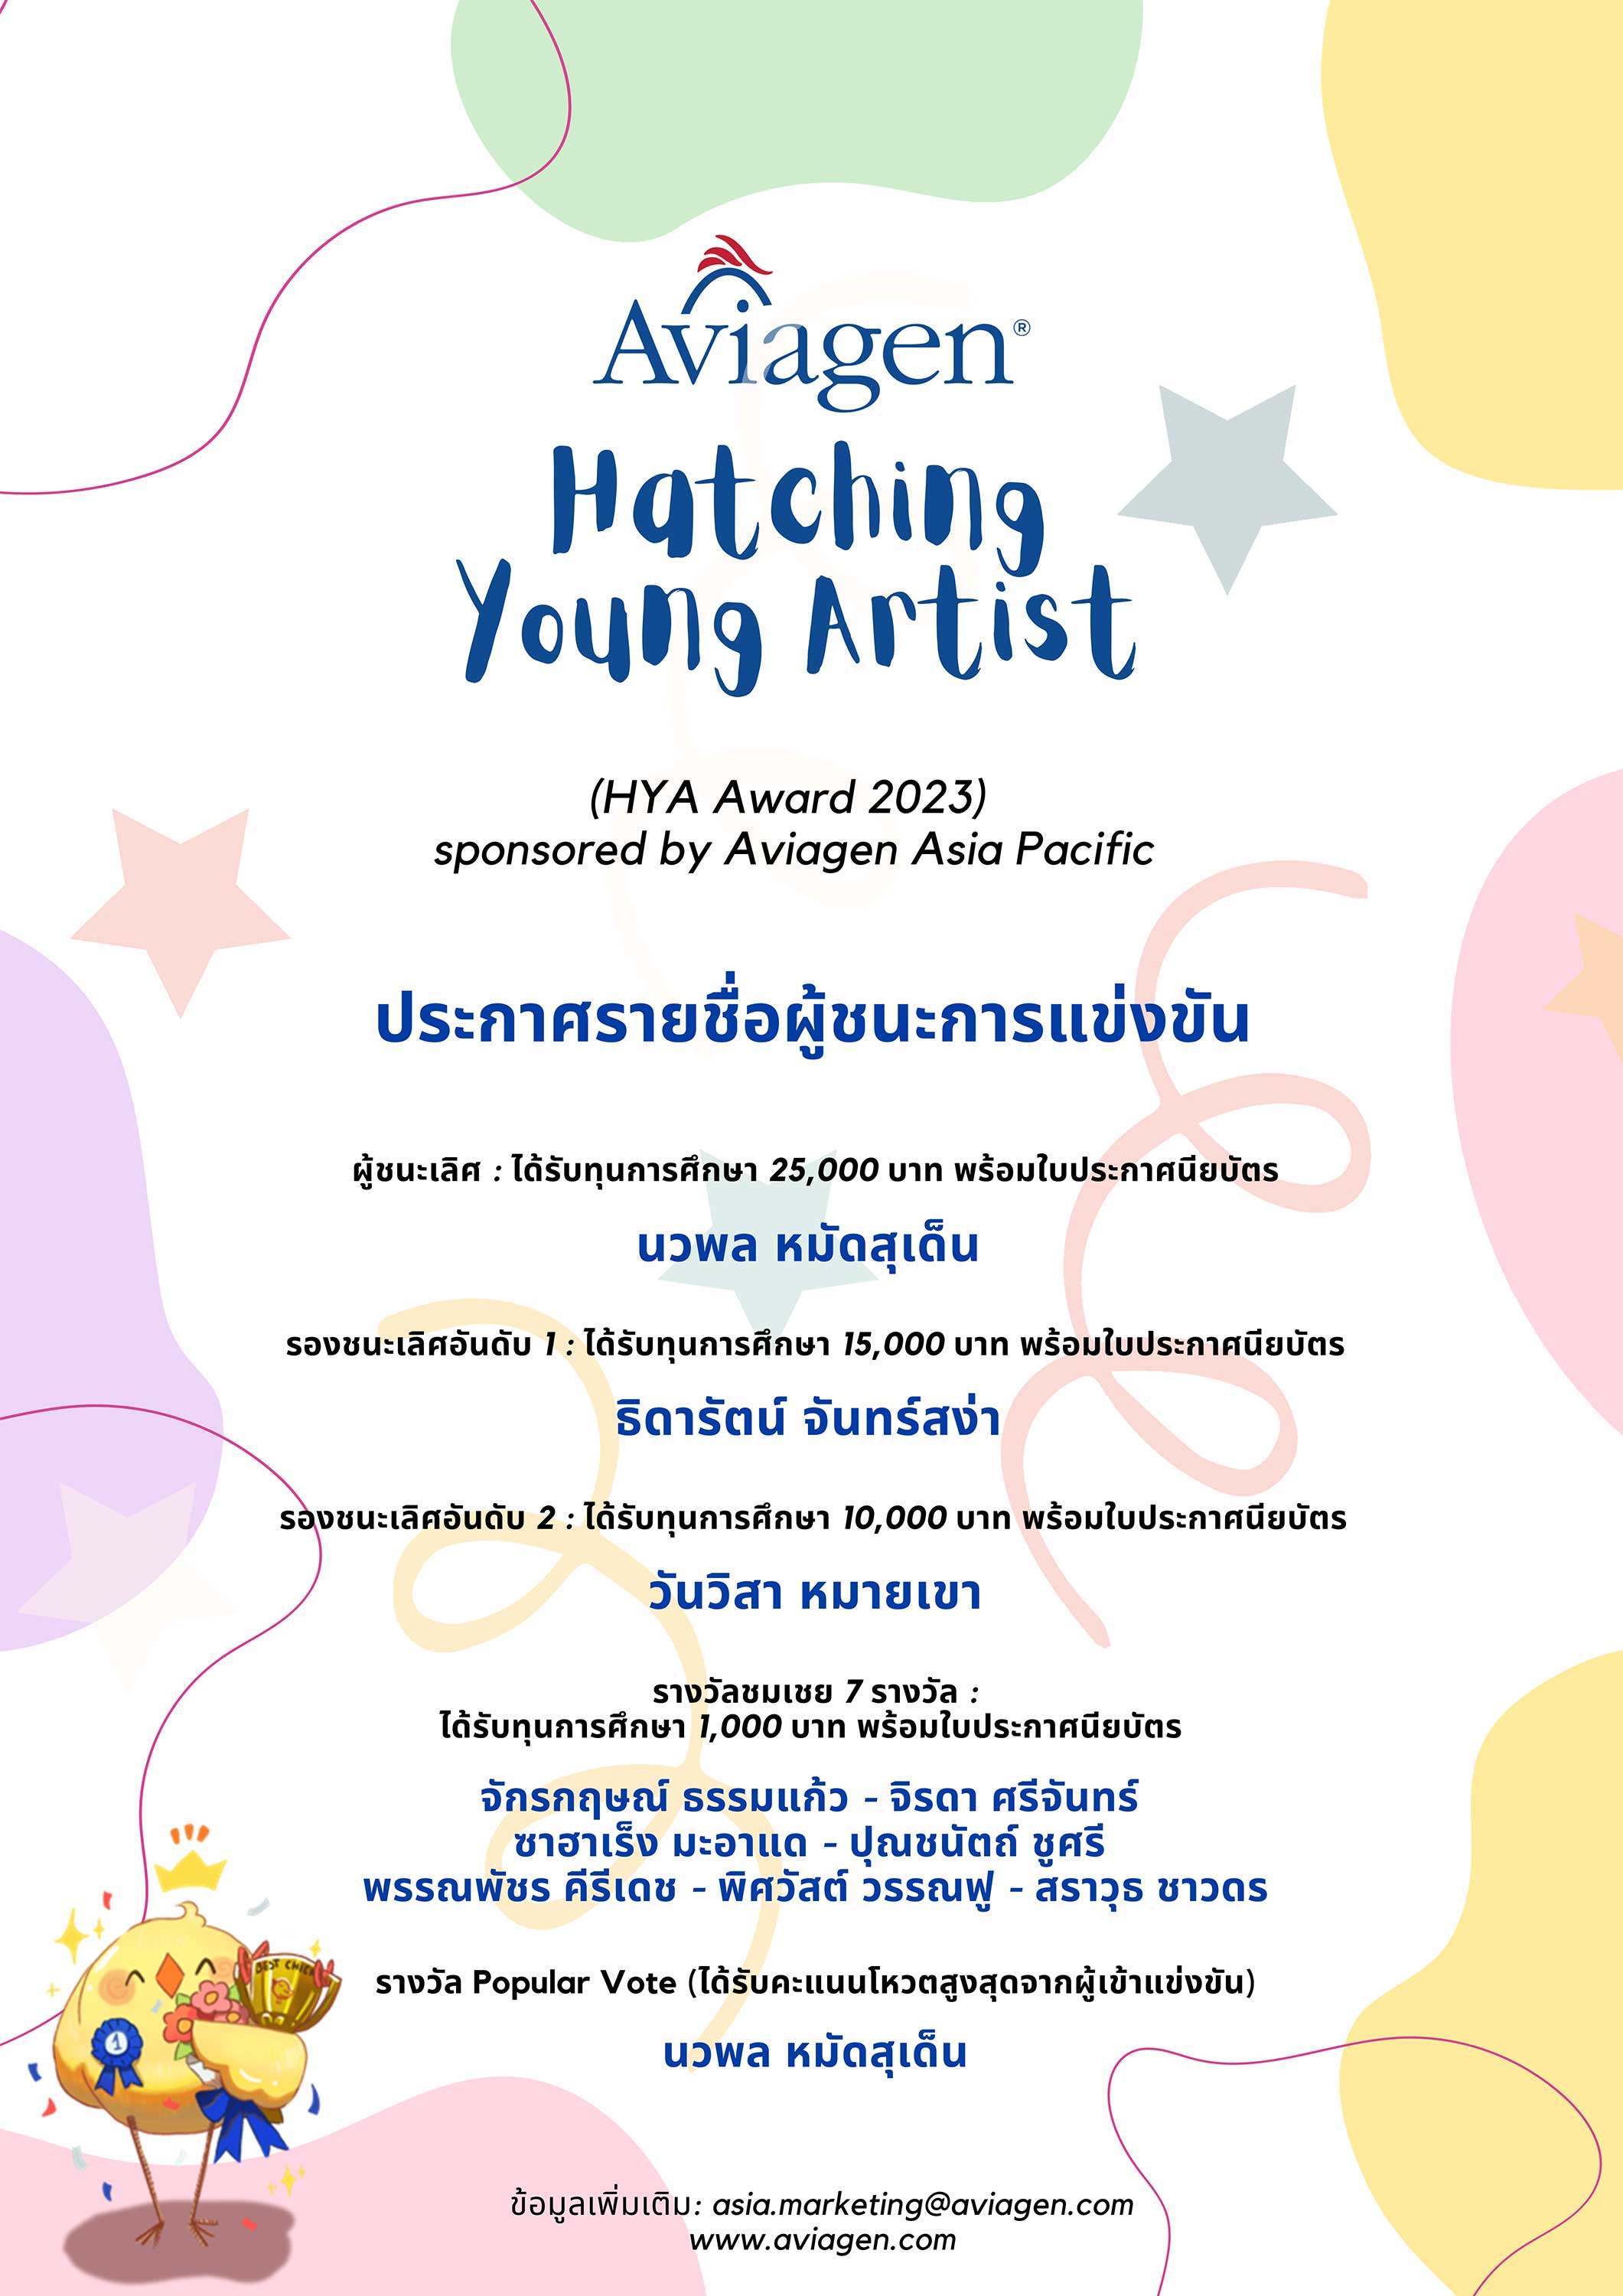 Result of Hatching Young Artist (HYA) 2023 | ผลการตัดสิน การประกวดศิลปะ Hatching Young Artist (HYA) 2023